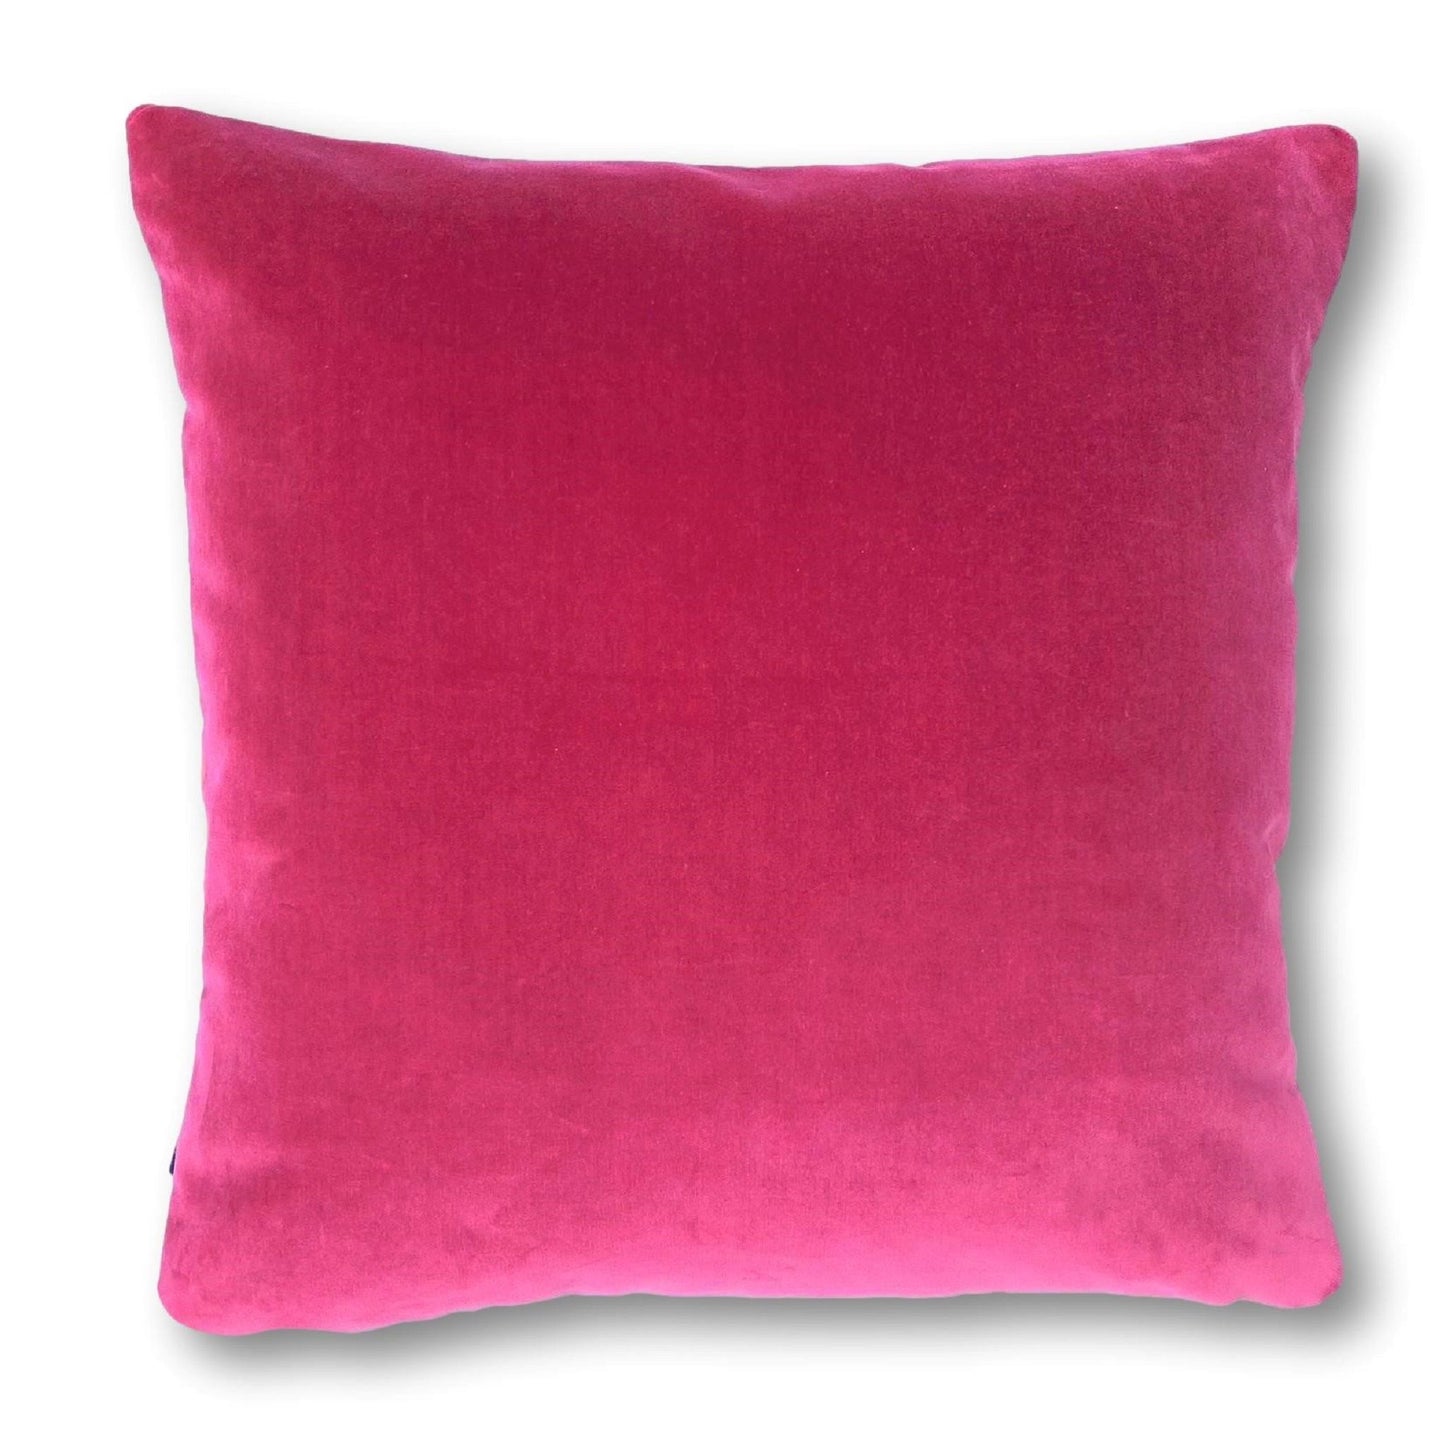 cushion covers online bright pink